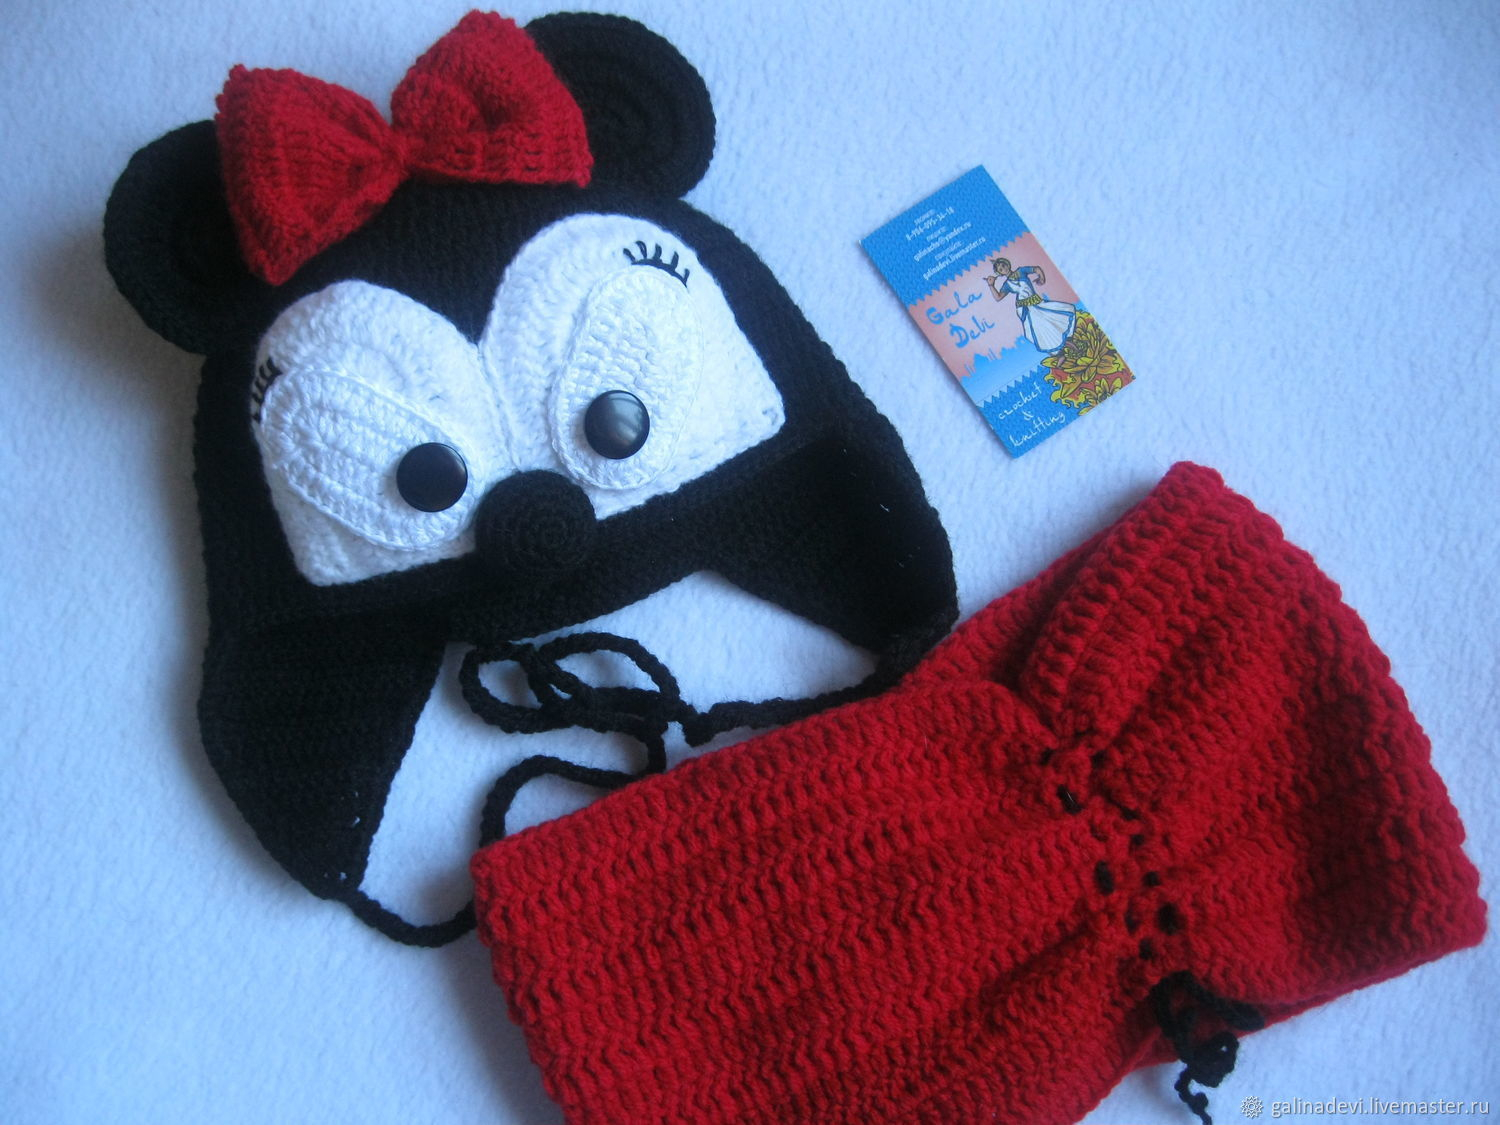 Knitting Pattern For Mickey Mouse Hat Set Mickey Mouse Hat And Cowl For Girls Knitted Shop Online On Livemaster With Shipping Fwmsjcom Moscow